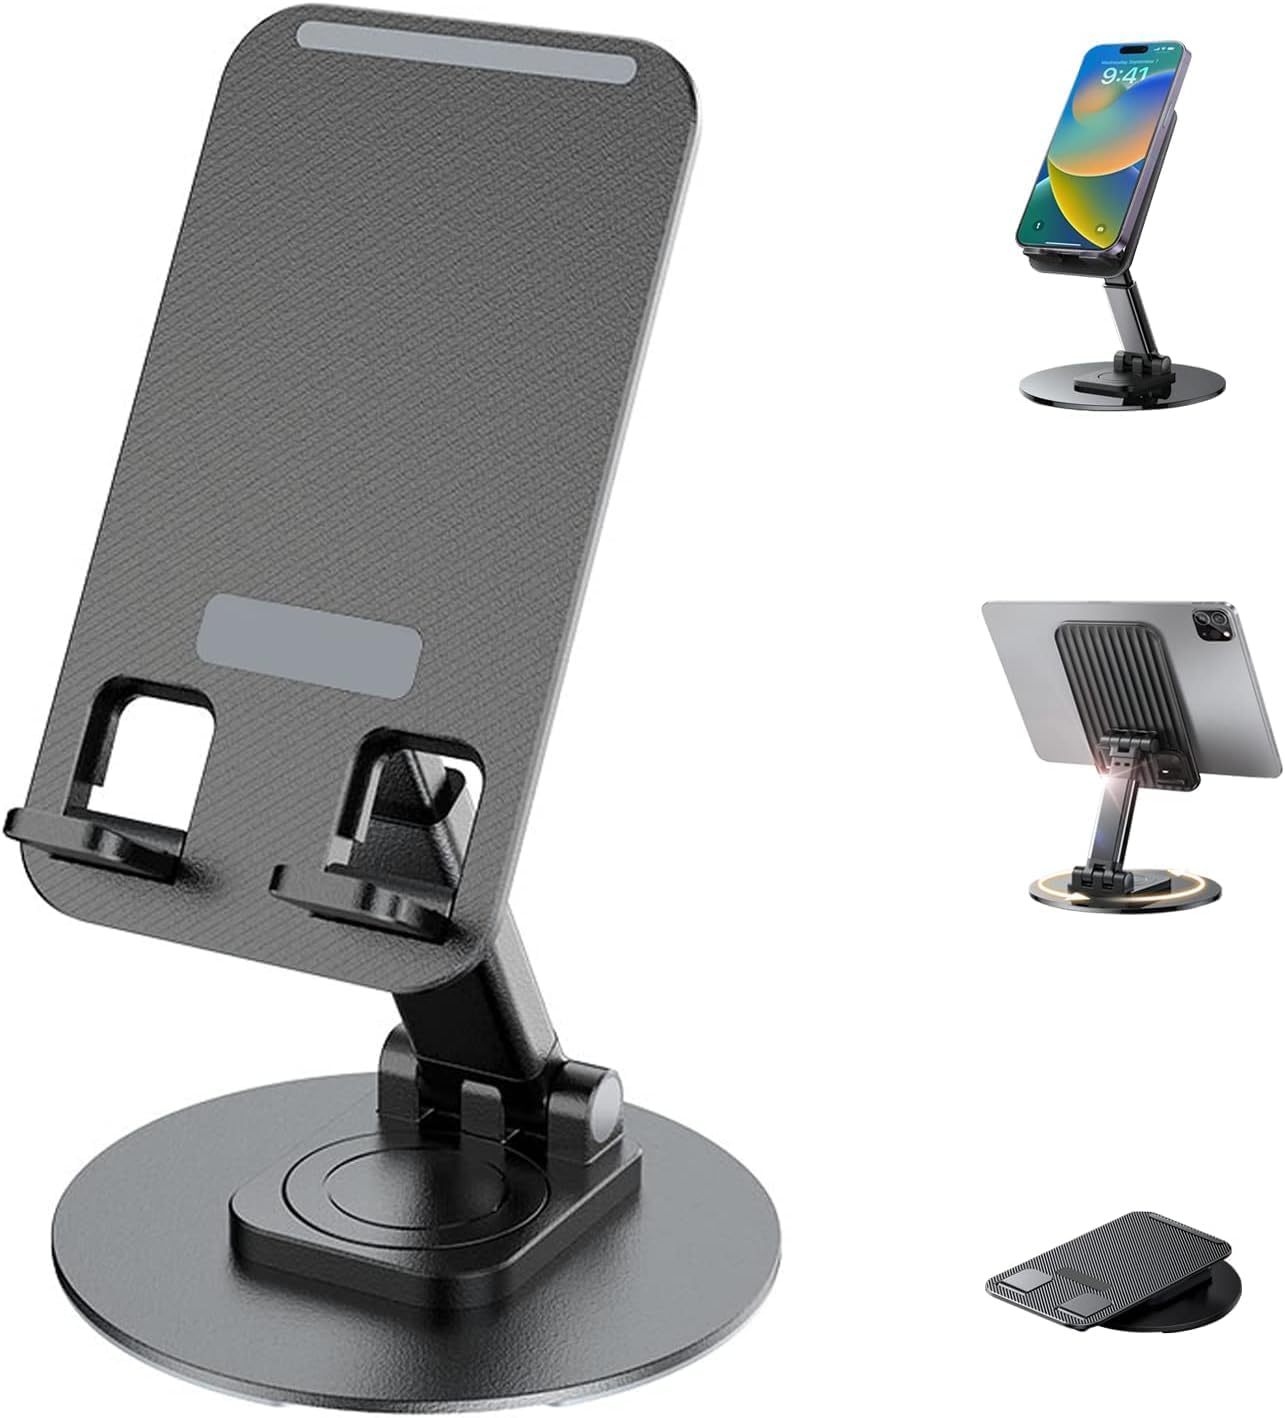 BOTIST Aluminum Alloy Mobile Phone Stand 360� Rotation Height and Angle Adjustable Cell Phone Stand for Desk Office Foldable Desktop Phone Holder for Smartphone (Pack of 1, Black or White)